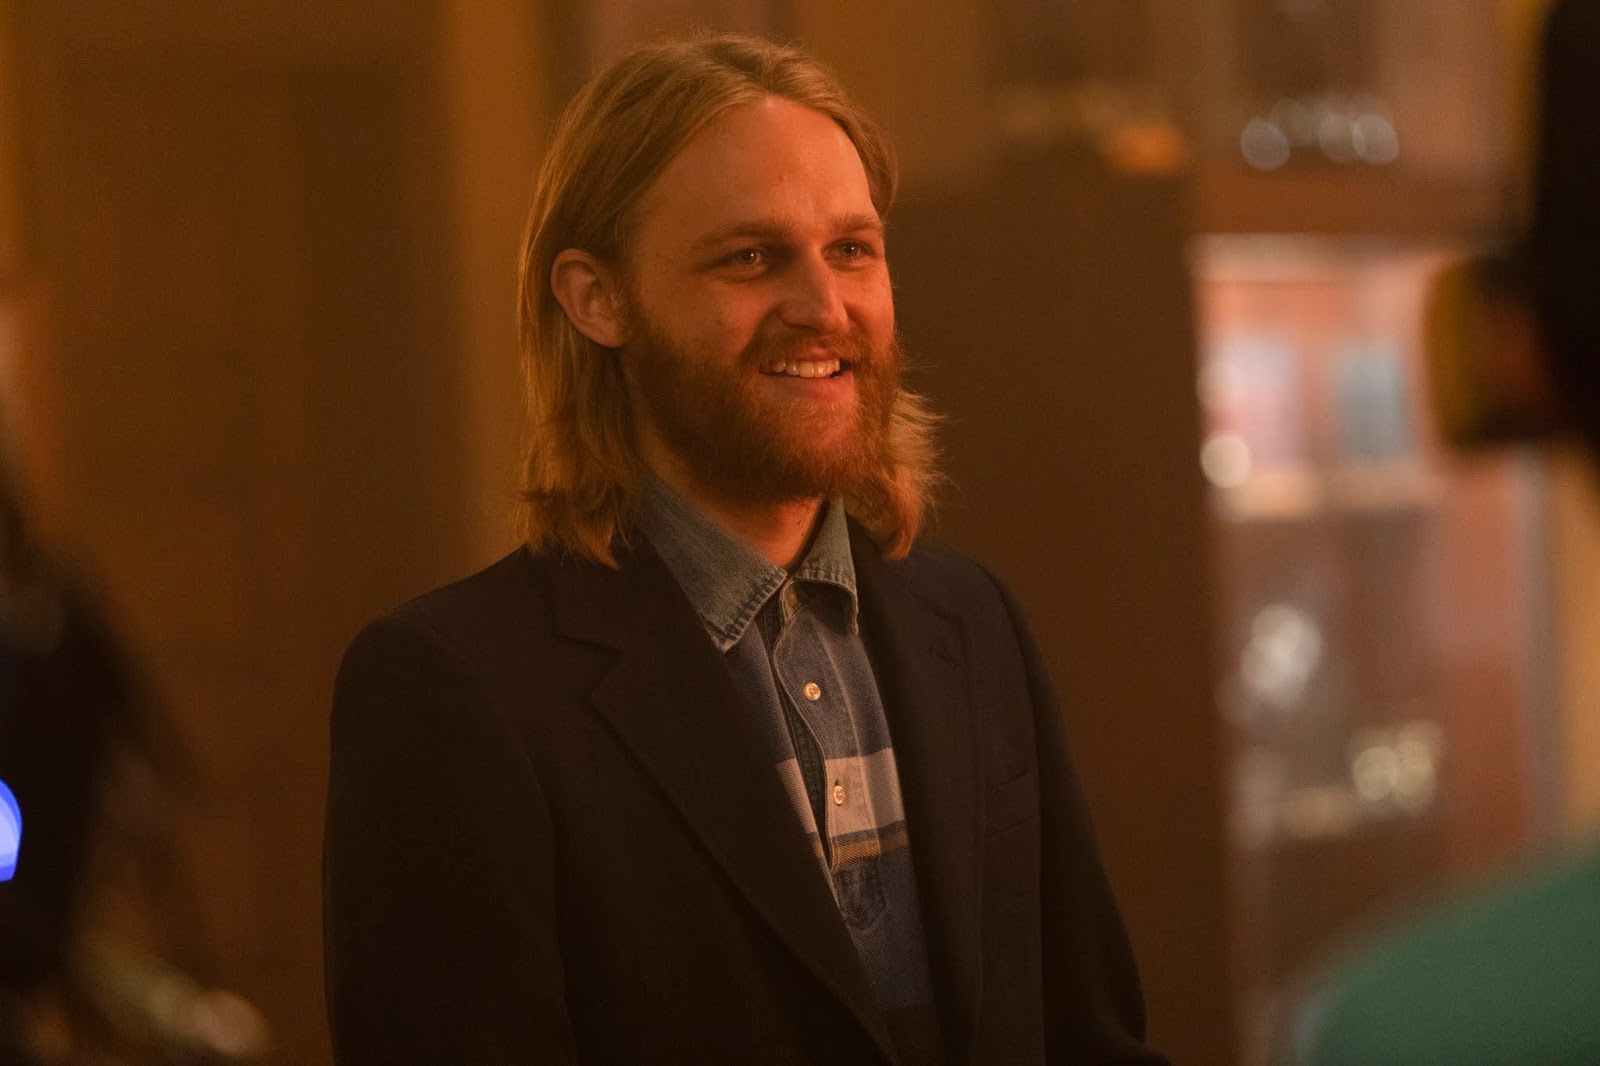 POLL : What did you think of Lodge 49 - Series Premiere?